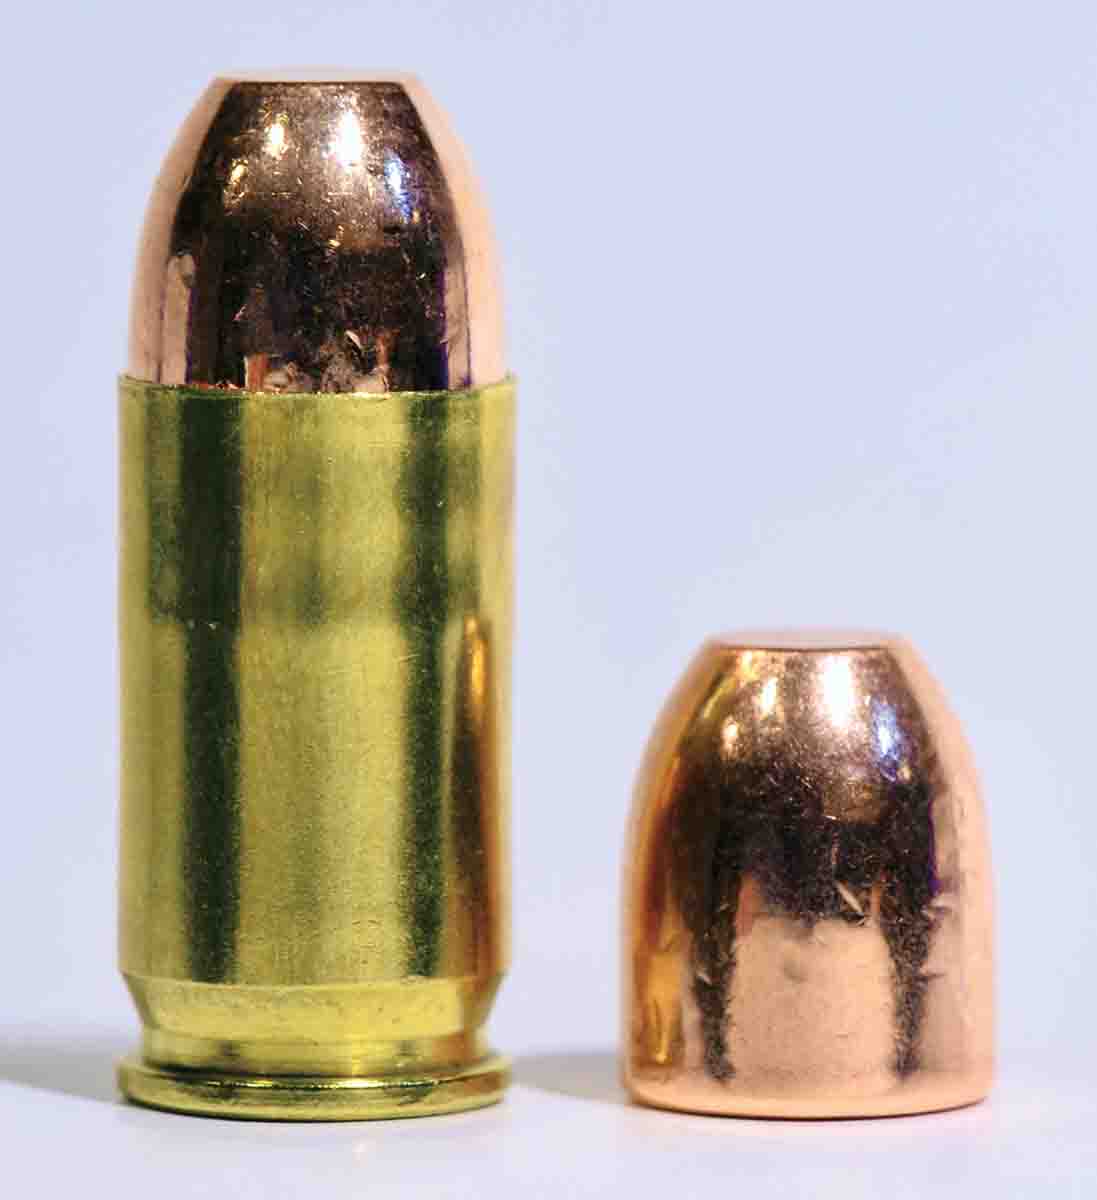 The .380 is two millimeters shorter than the 9mm Luger, with reduced powder capacity. Anything heavier than this 100-grain bullet reduces capacity even further, with commensurate reduction in velocity and possibly compromised operation.